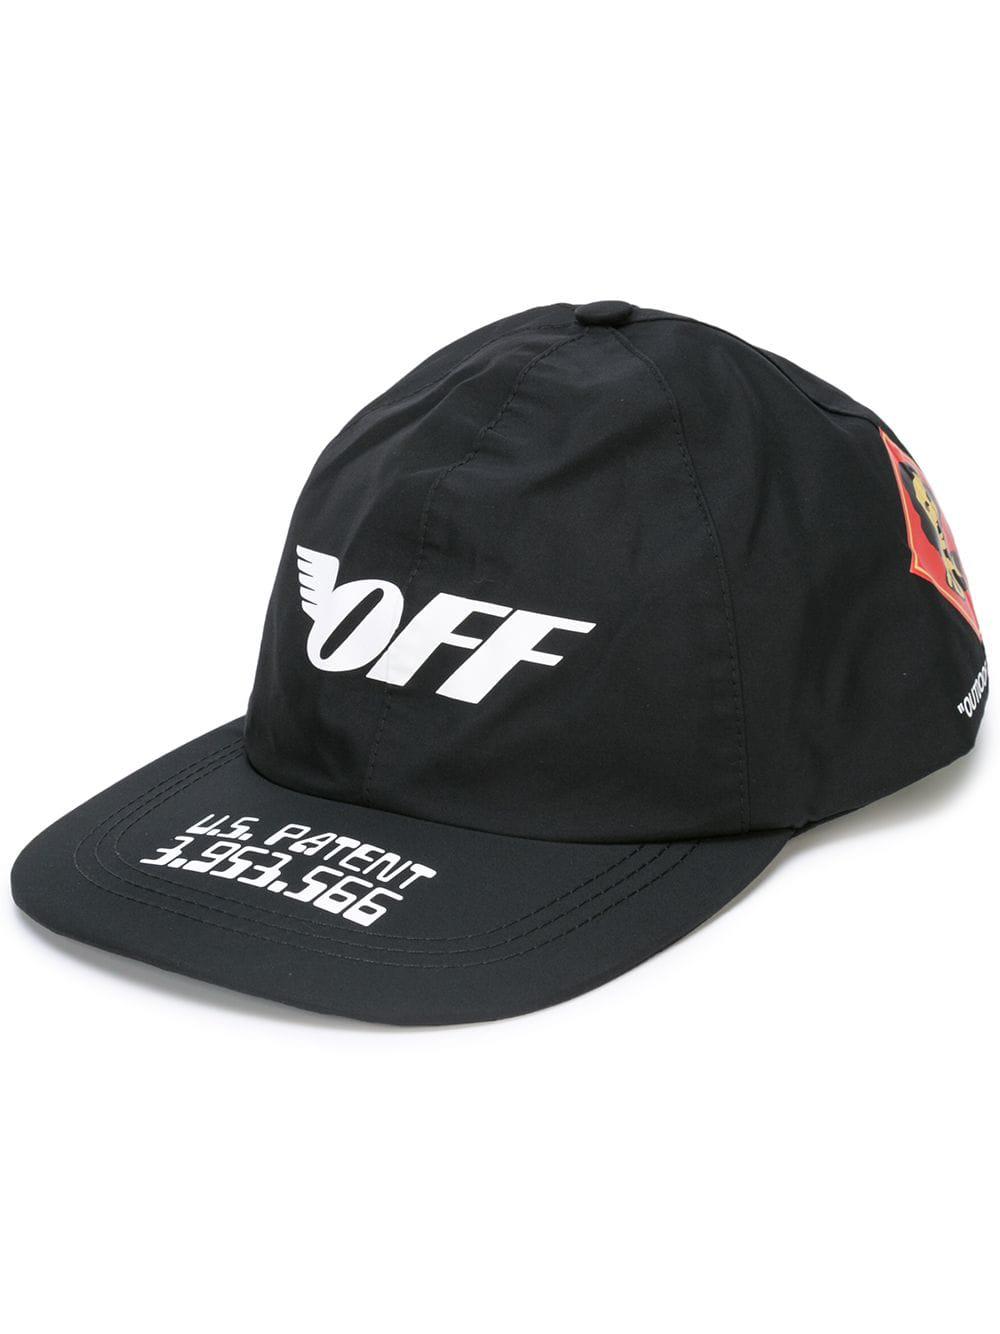 Off-White c/o Virgil Abloh Synthetic Wing Print Cap in Black 